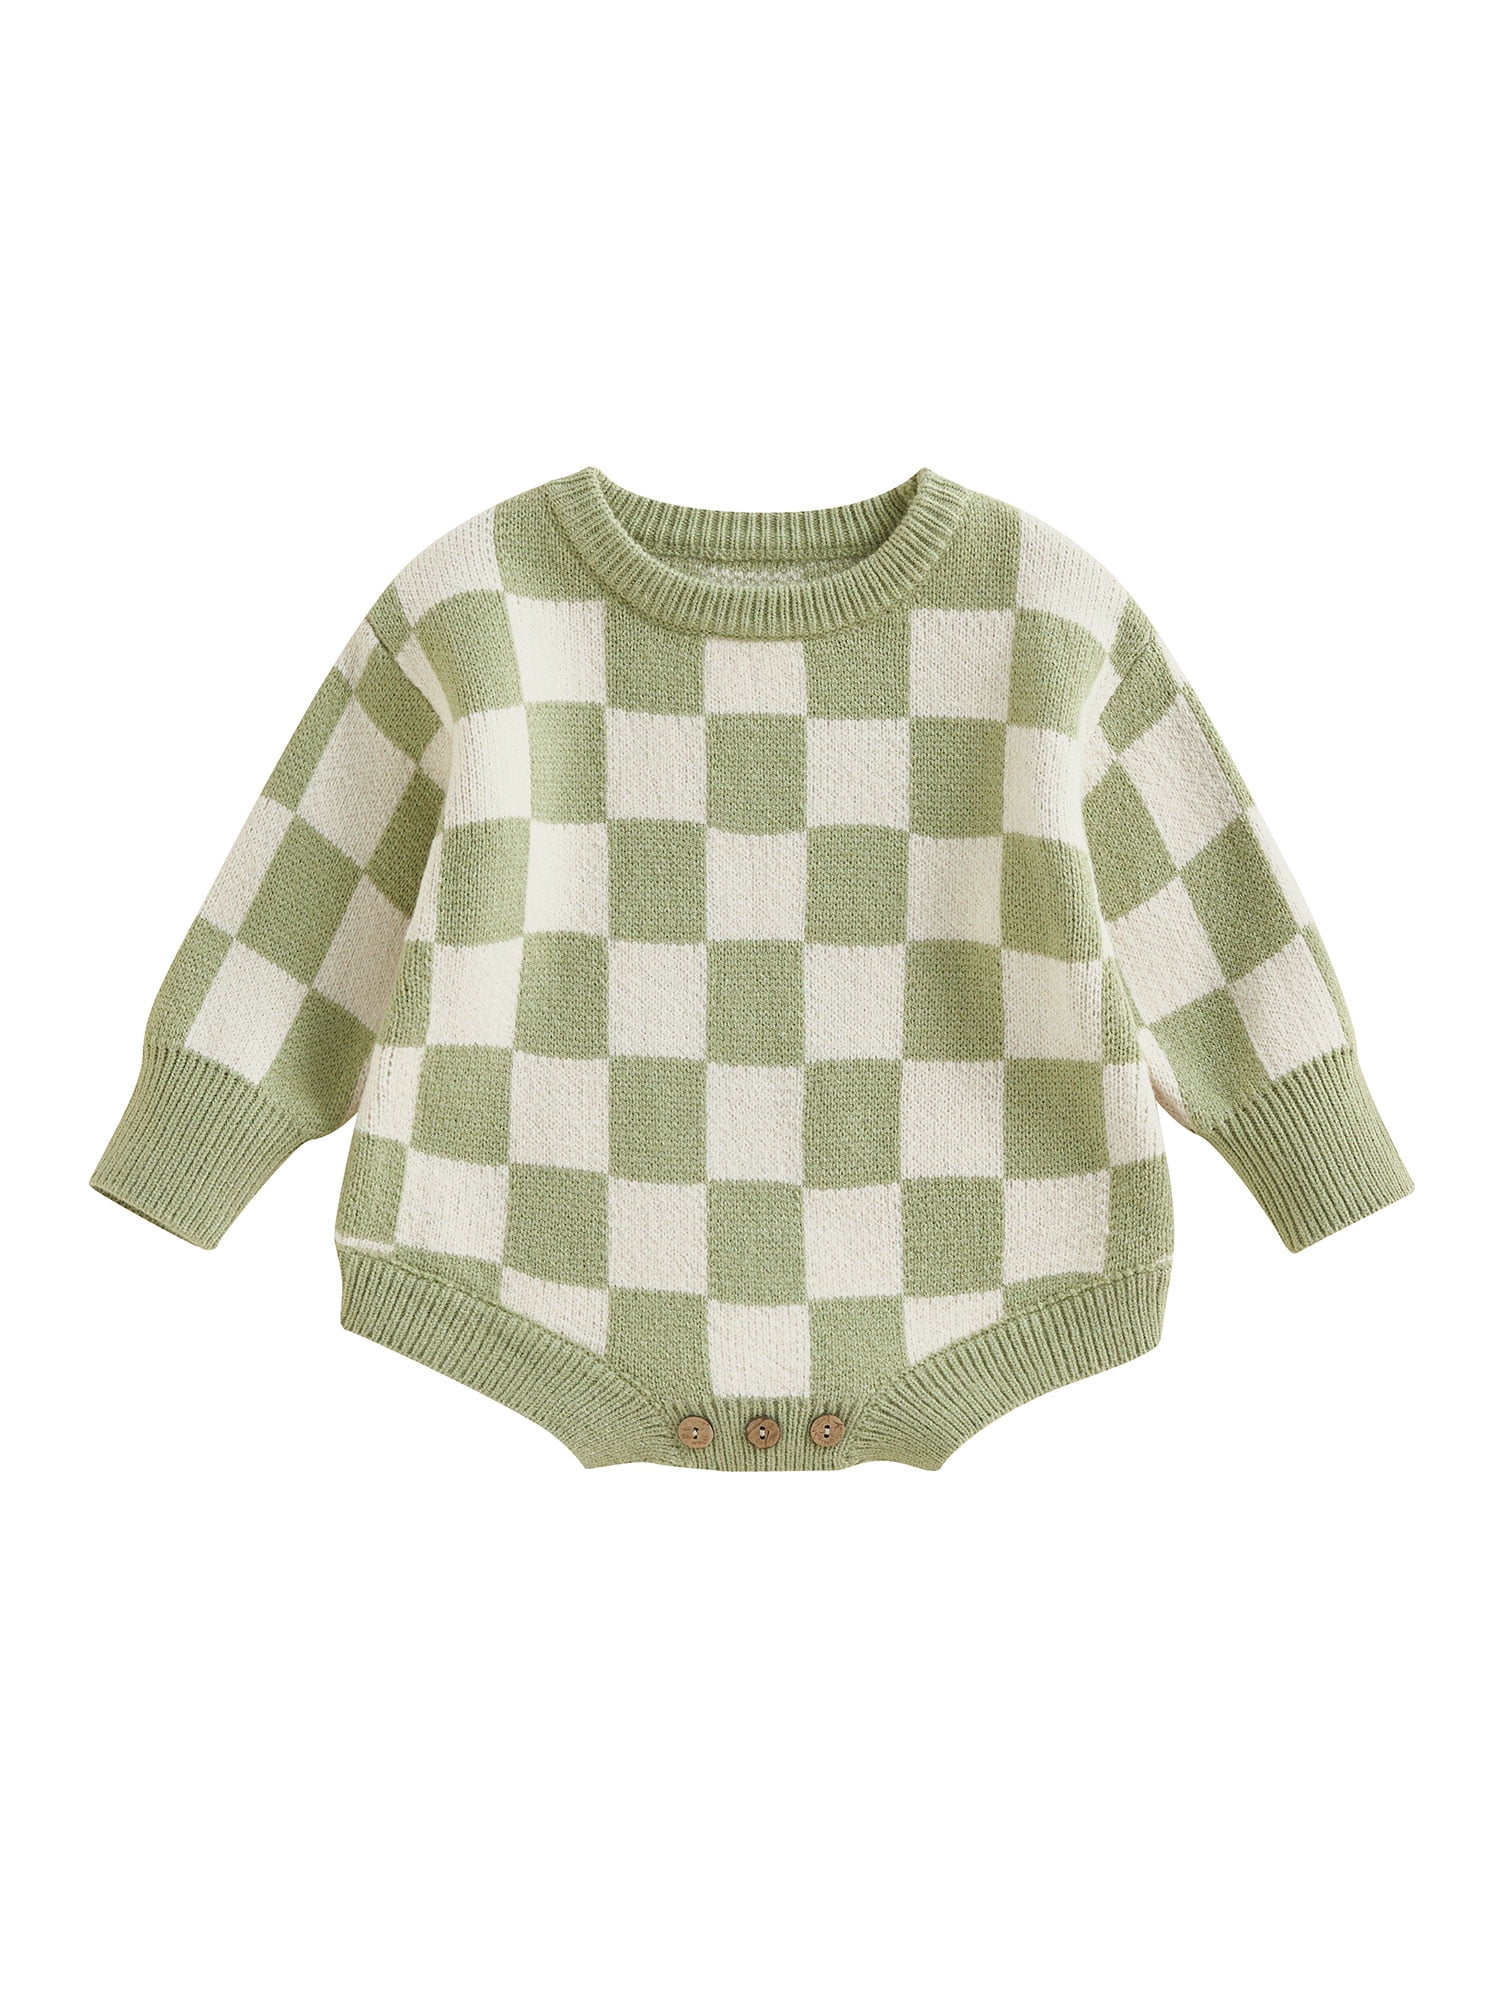 Loalirando Baby Boy Girl Knit Checkerboard Plaid Sweater Romper Pullover Soft Warm Fall Winter Clothes, Infant Unisex, Size: 6-9 Months, Green